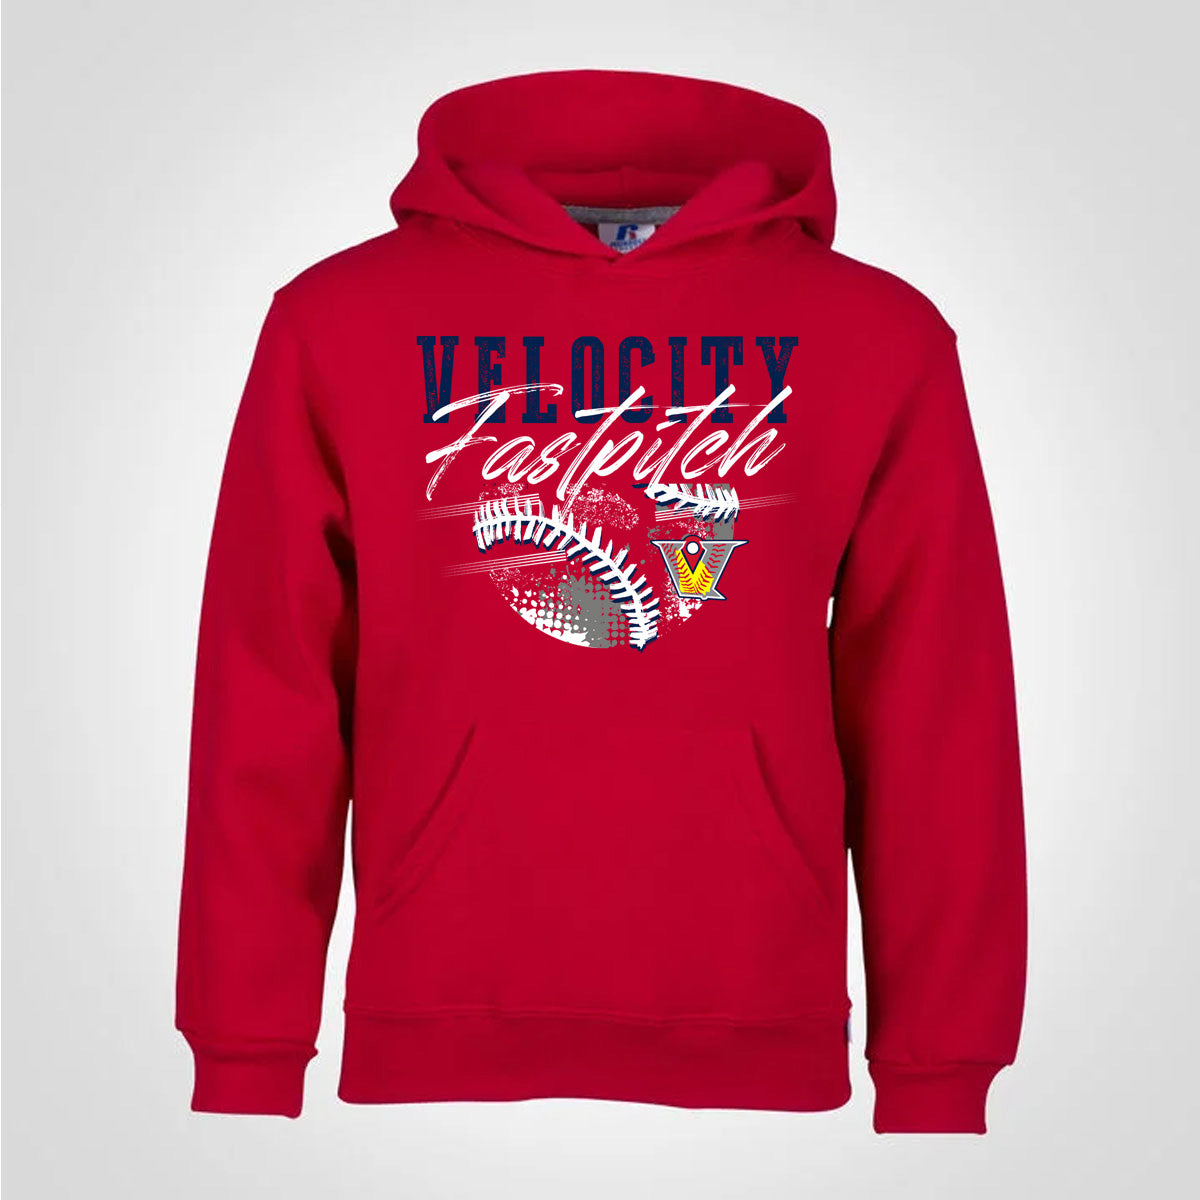 Velo FP - VELOCITY FASTPITCH WITH BALL AND LOGO - Red (Tee/DriFit/Hoodie/Sweatshirt) - Southern Grace Creations